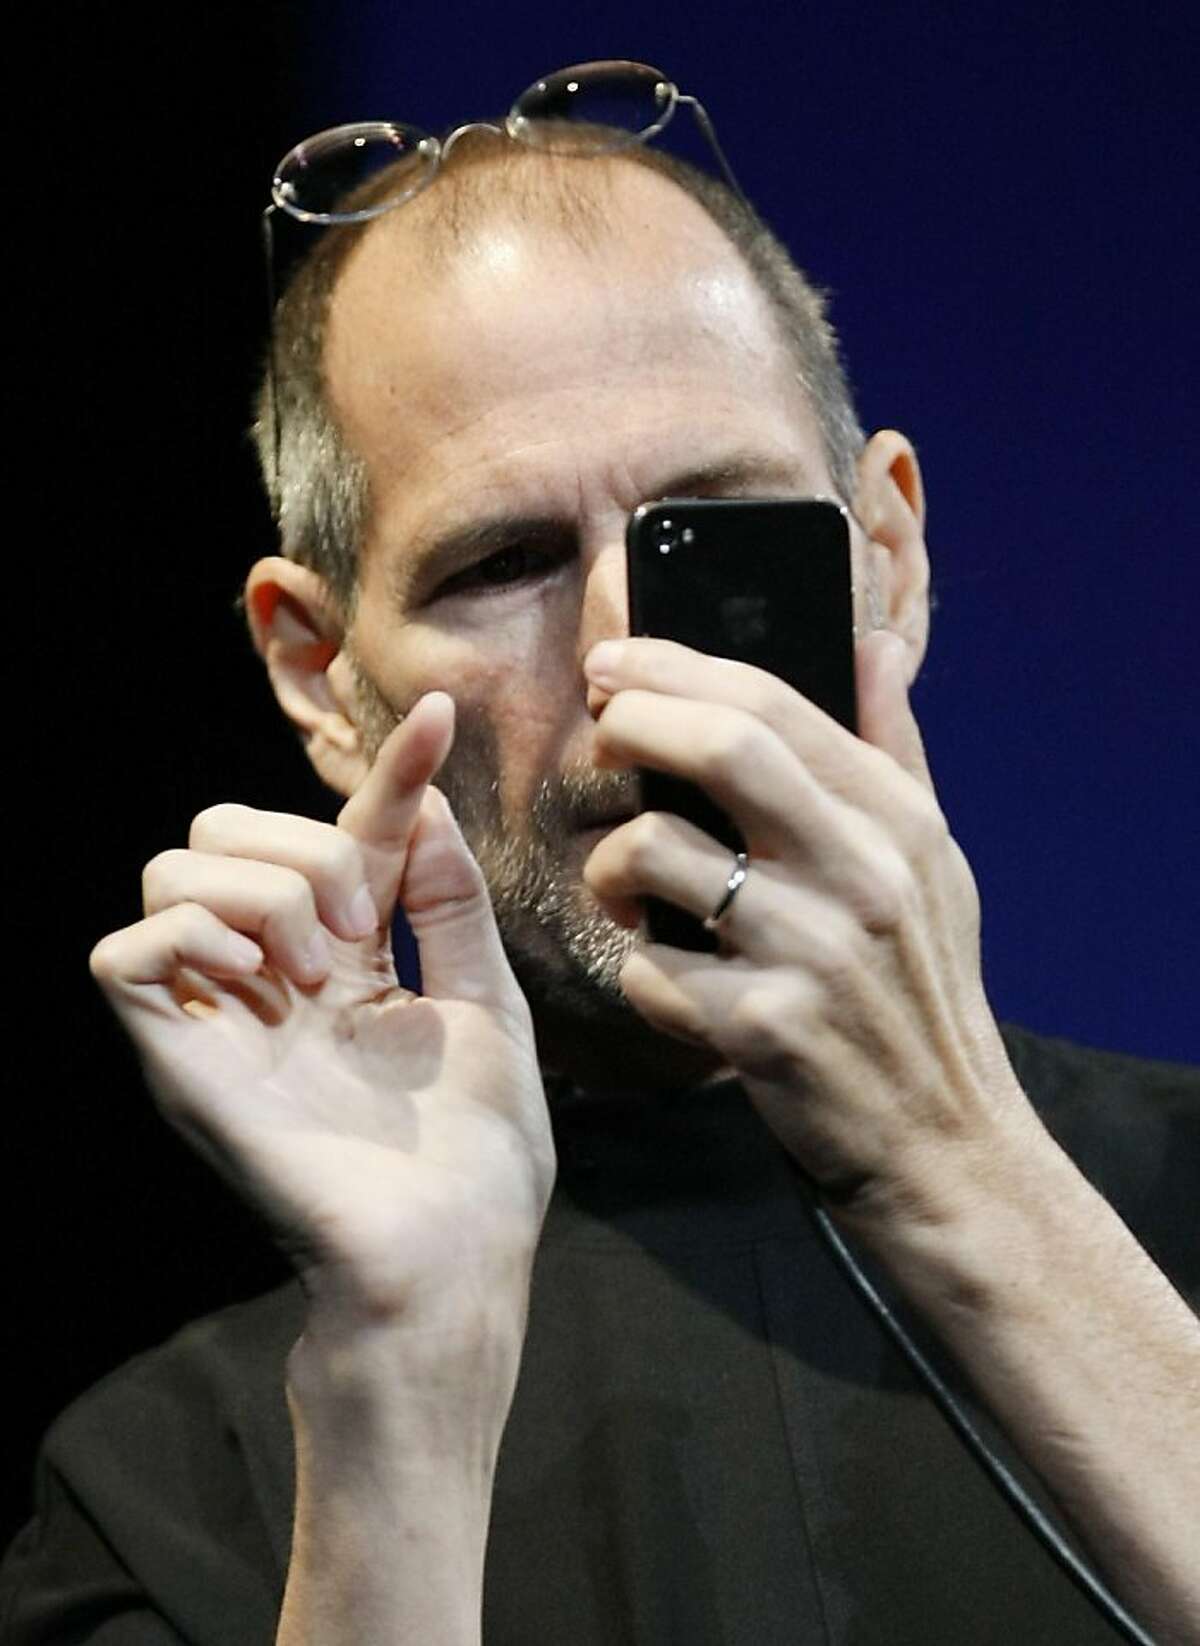 In this June 7, 2010 photo, Apple CEO Steve Jobs uses the new iPhone 4, at the Apple Worldwide Developers Conference in San Francisco. Apple said Friday, July 2, it is "stunned" to find that its latest iPhone model uses a "completely wrong" formula to show how many bars of signal strength it's getting. (AP Photo/Paul Sakuma) Ran on: 07-13-2010 Apples Steve Jobs demos the iPhone 4 in San Francisco. Ran on: 07-13-2010 Apples Steve Jobs demos the iPhone 4 in San Francisco.